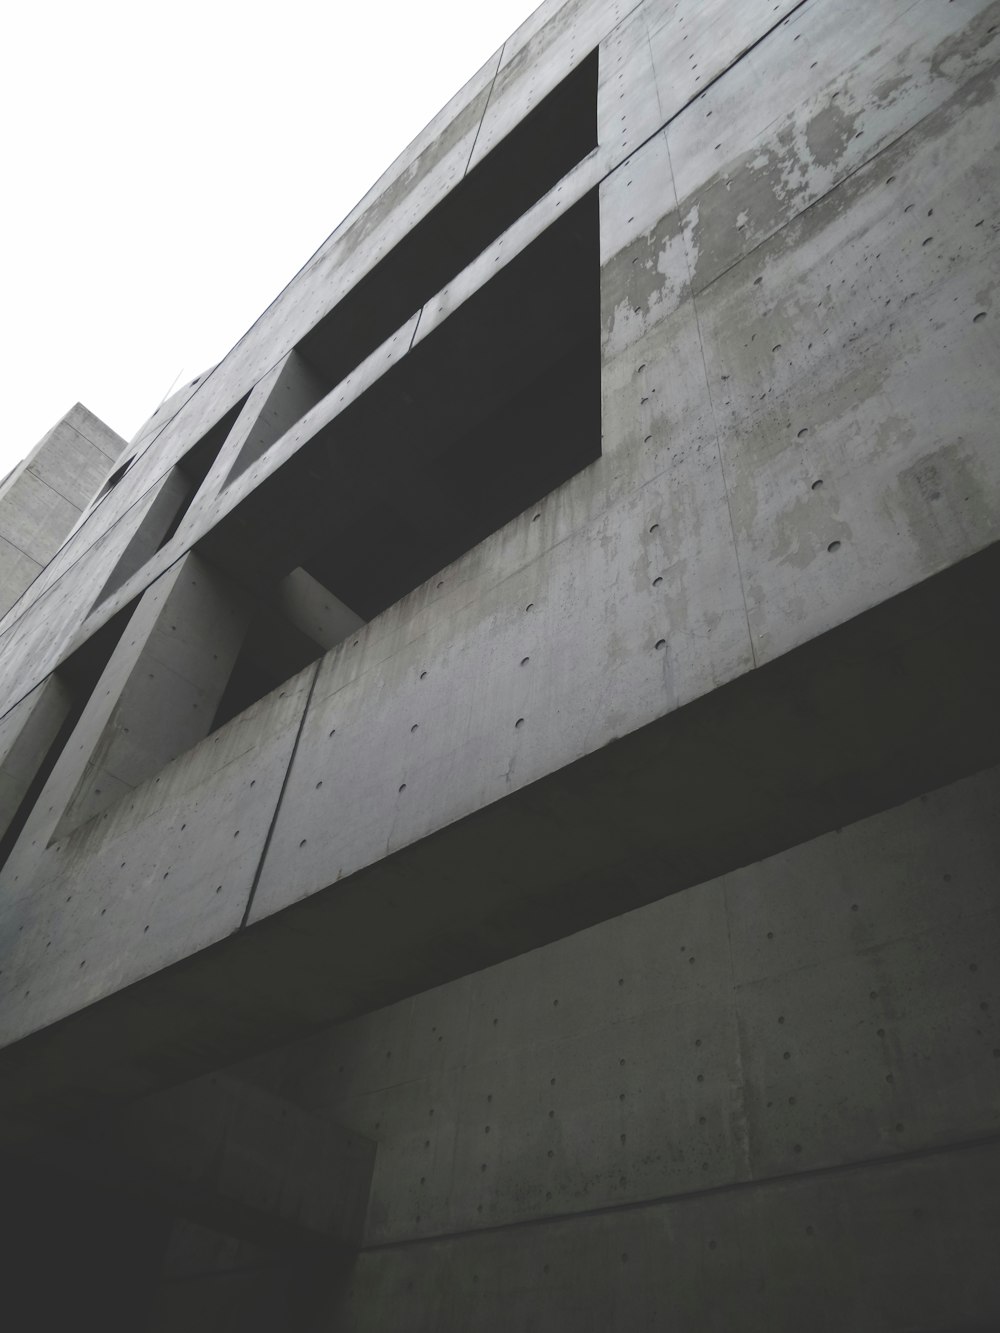 grayscale photography of concrete building